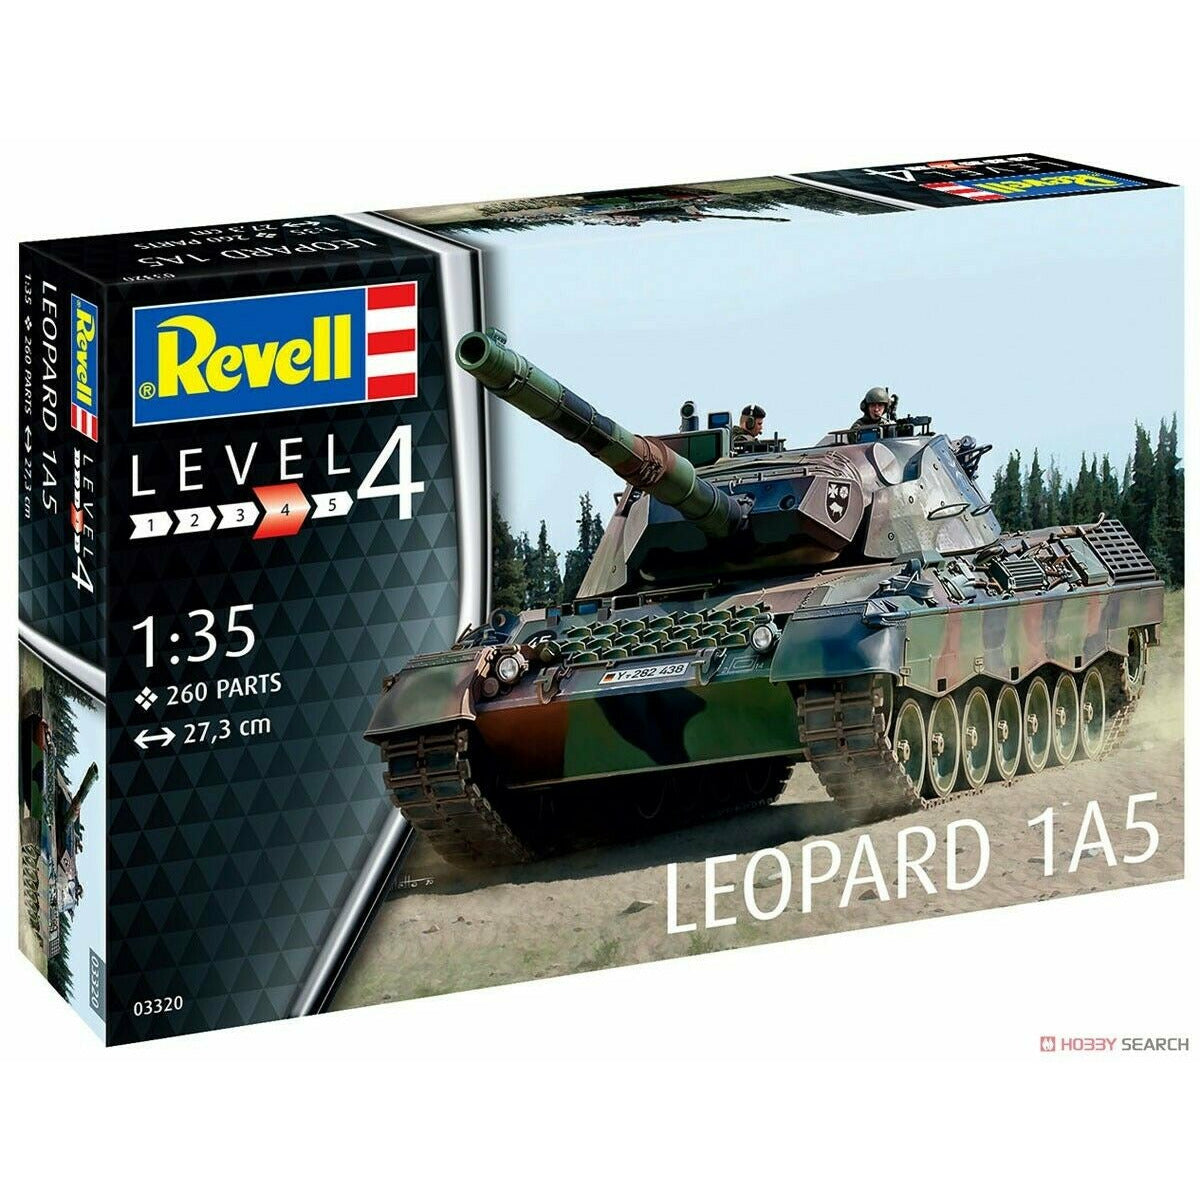 Leopard 1A5 1/35 #03320 by Revell